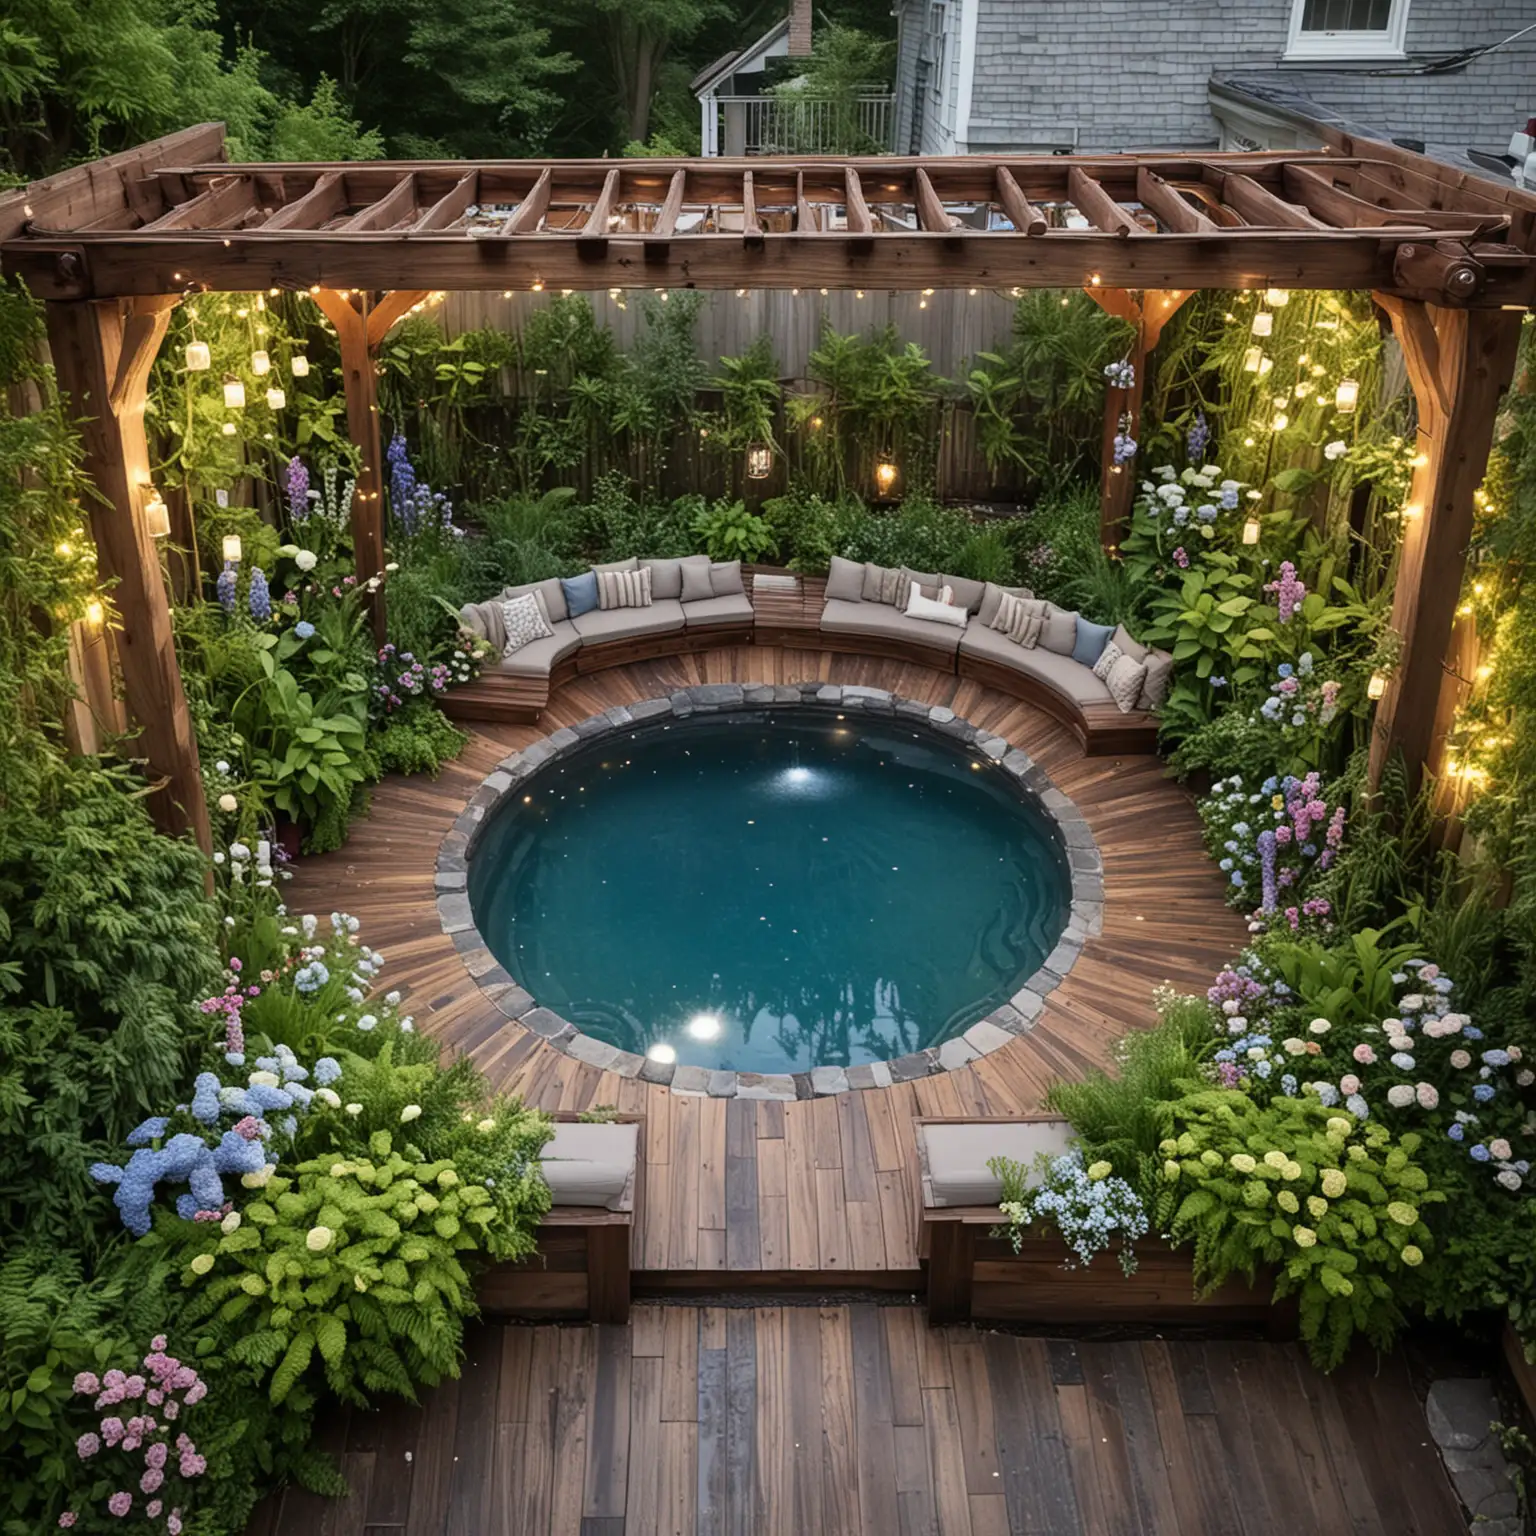 a birds eye view of A cozy urban backyard featuring a mix of flowering plants like hydrangeas, roses, and lavender surrounding a central wooden deck made of rich, dark mahogany. A small, circular plunge pool with a stone border and built-in underwater LED lights offers a relaxing dip. Adjacent to the pool, place a custom-built outdoor couch with waterproof, plush cushions under a pergola draped with wisteria and fairy lights. A vertical garden on one wall hosts a variety of herbs and ferns, creating a vibrant green backdrop.